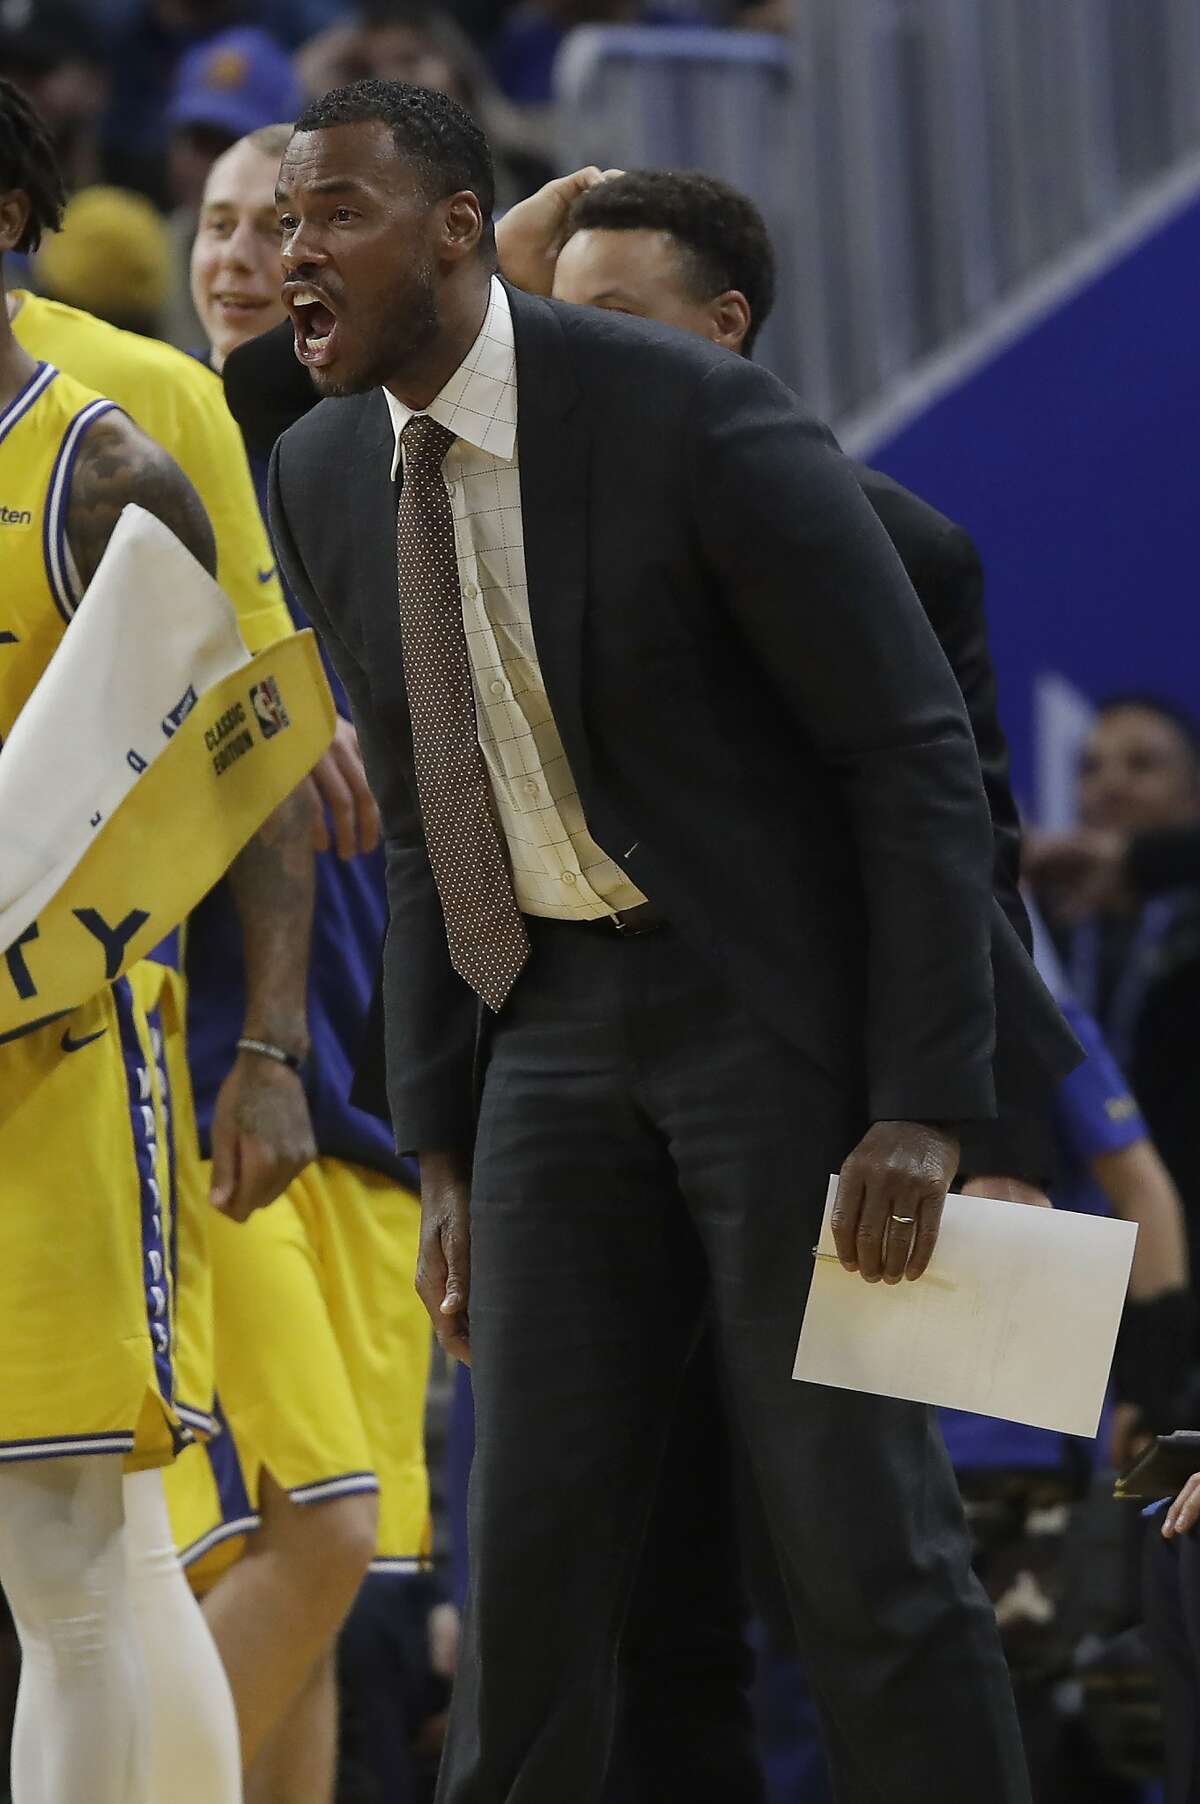 Golden State Warriors assistant coach Jarron Collins against the Phoenix Suns during an NBA basketball game in San Francisco, Friday, Dec. 27, 2019. (AP Photo/Jeff Chiu)